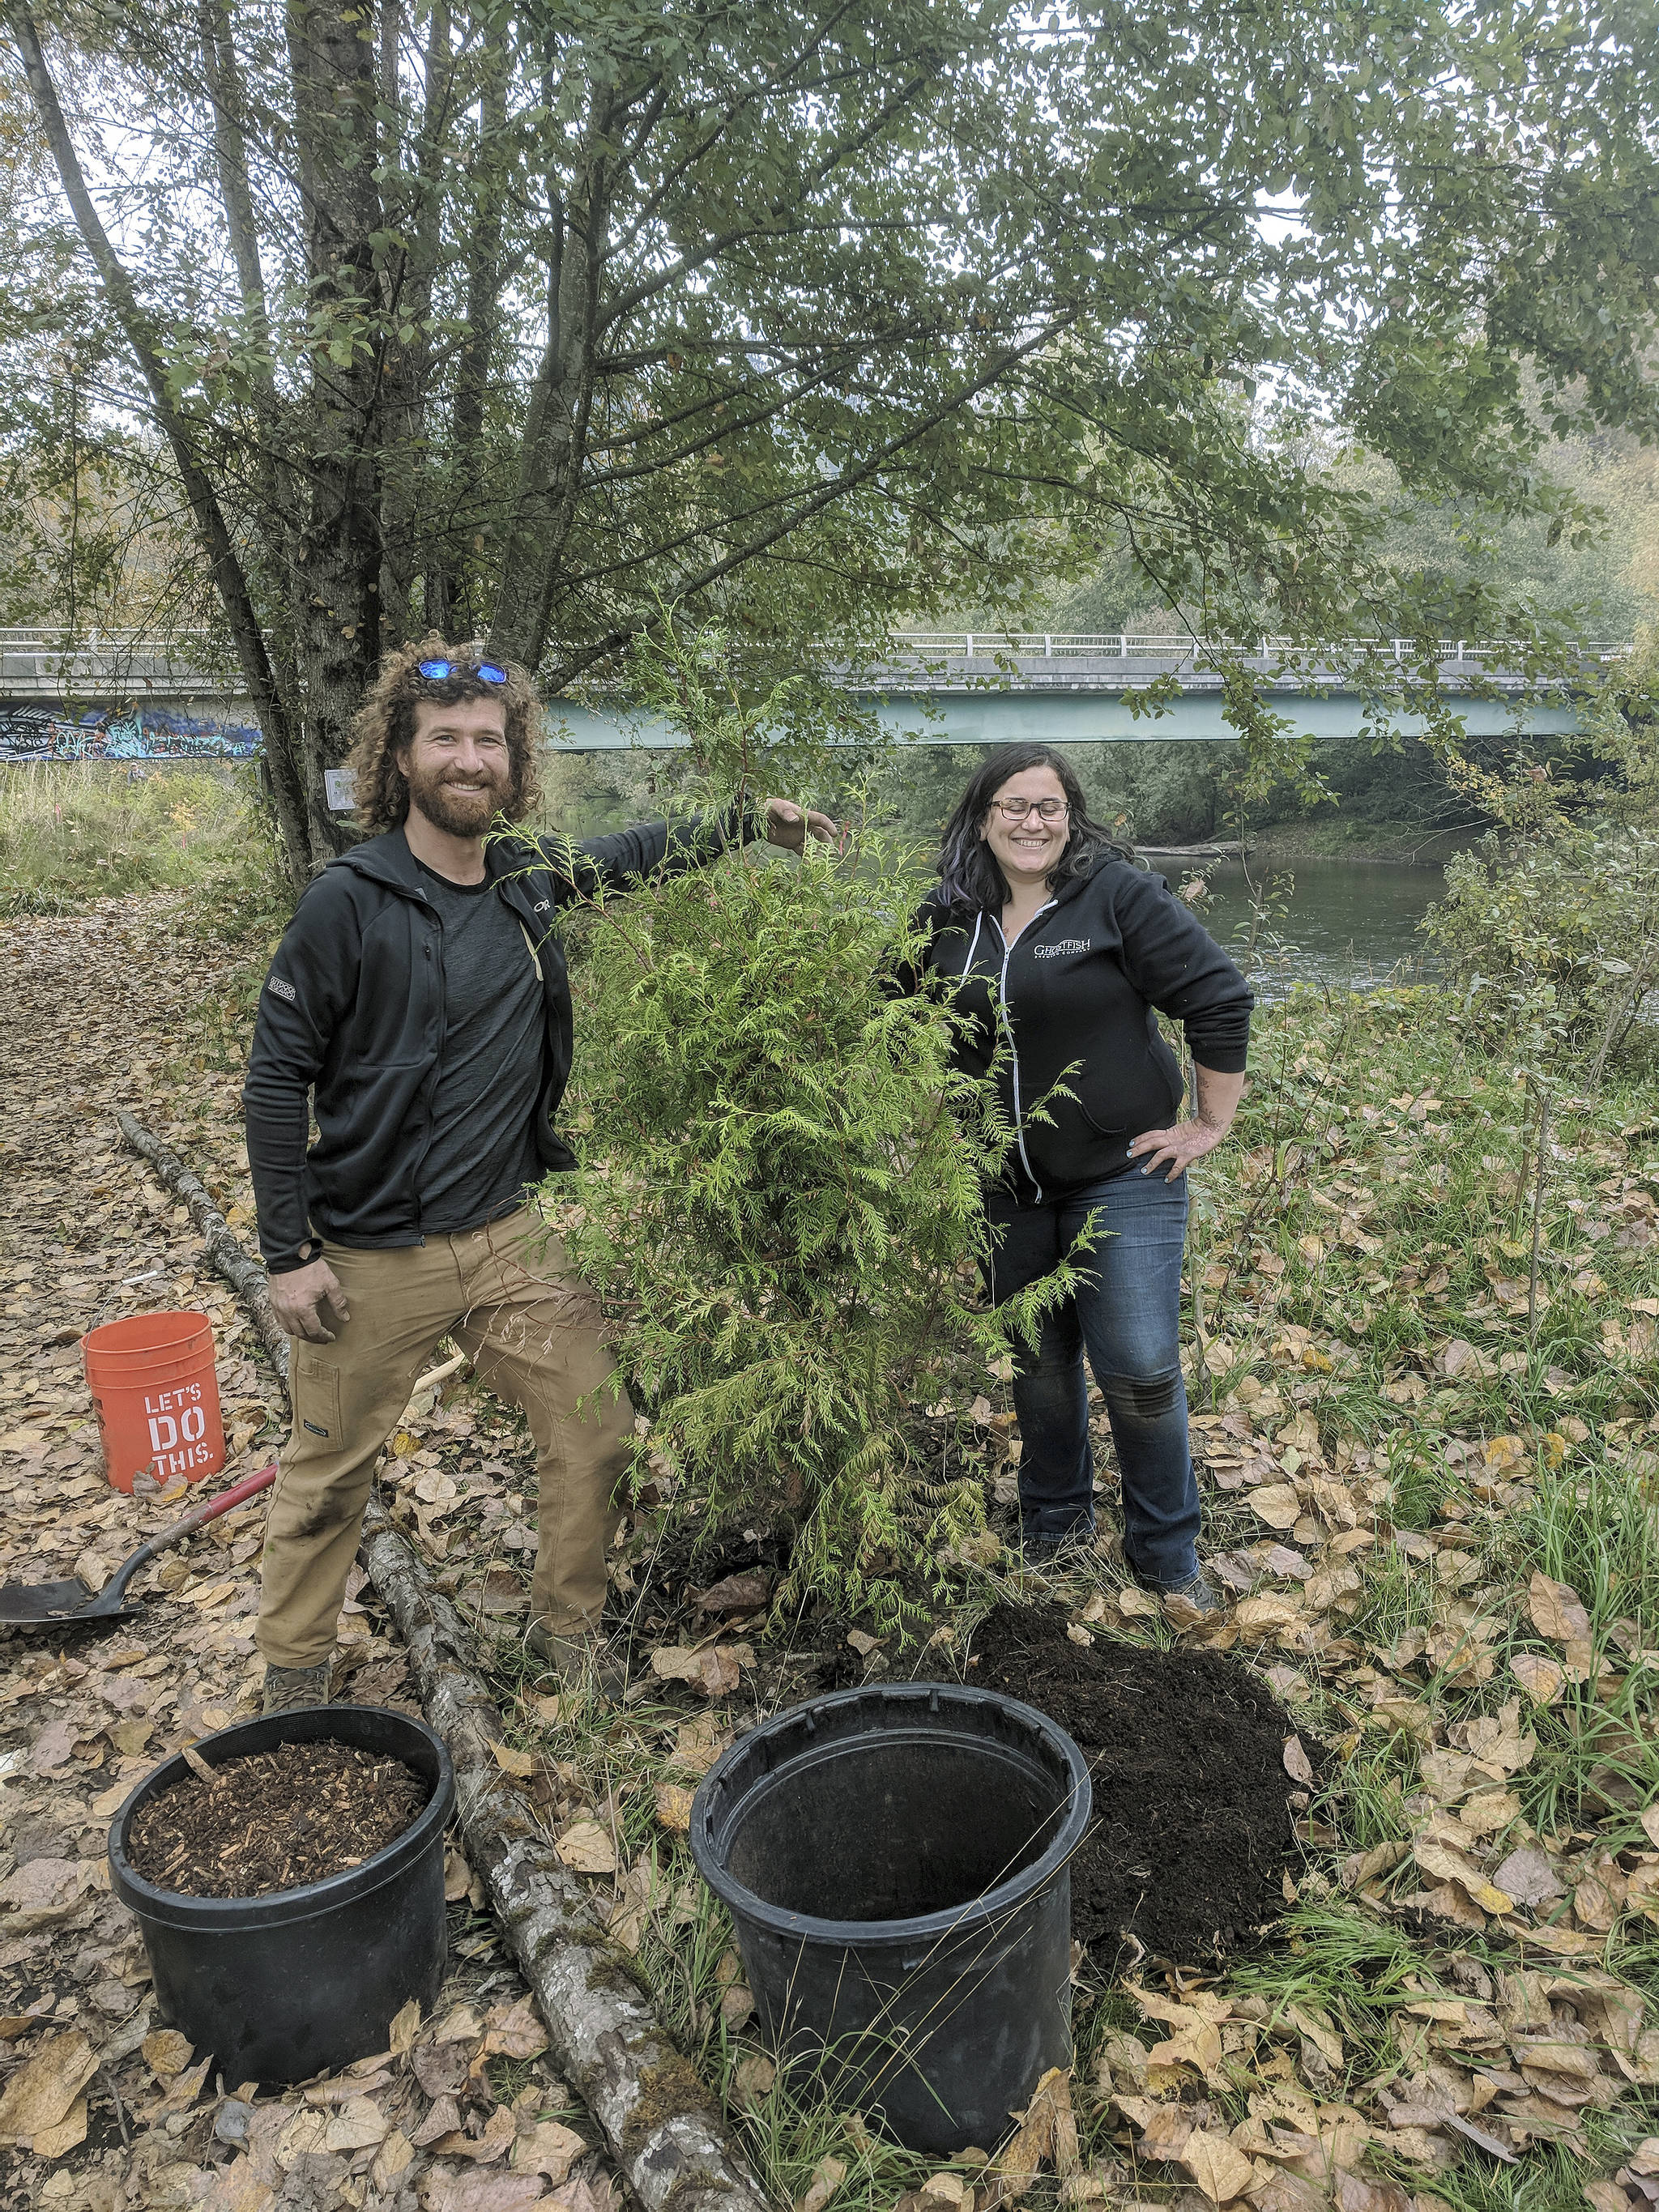 Peter Elkins and Tina Hope, student interns from Green River College who work with the Green River Coalition, plant new vegetation along the banks of the Green River last Saturday. COURTESY PHOTO